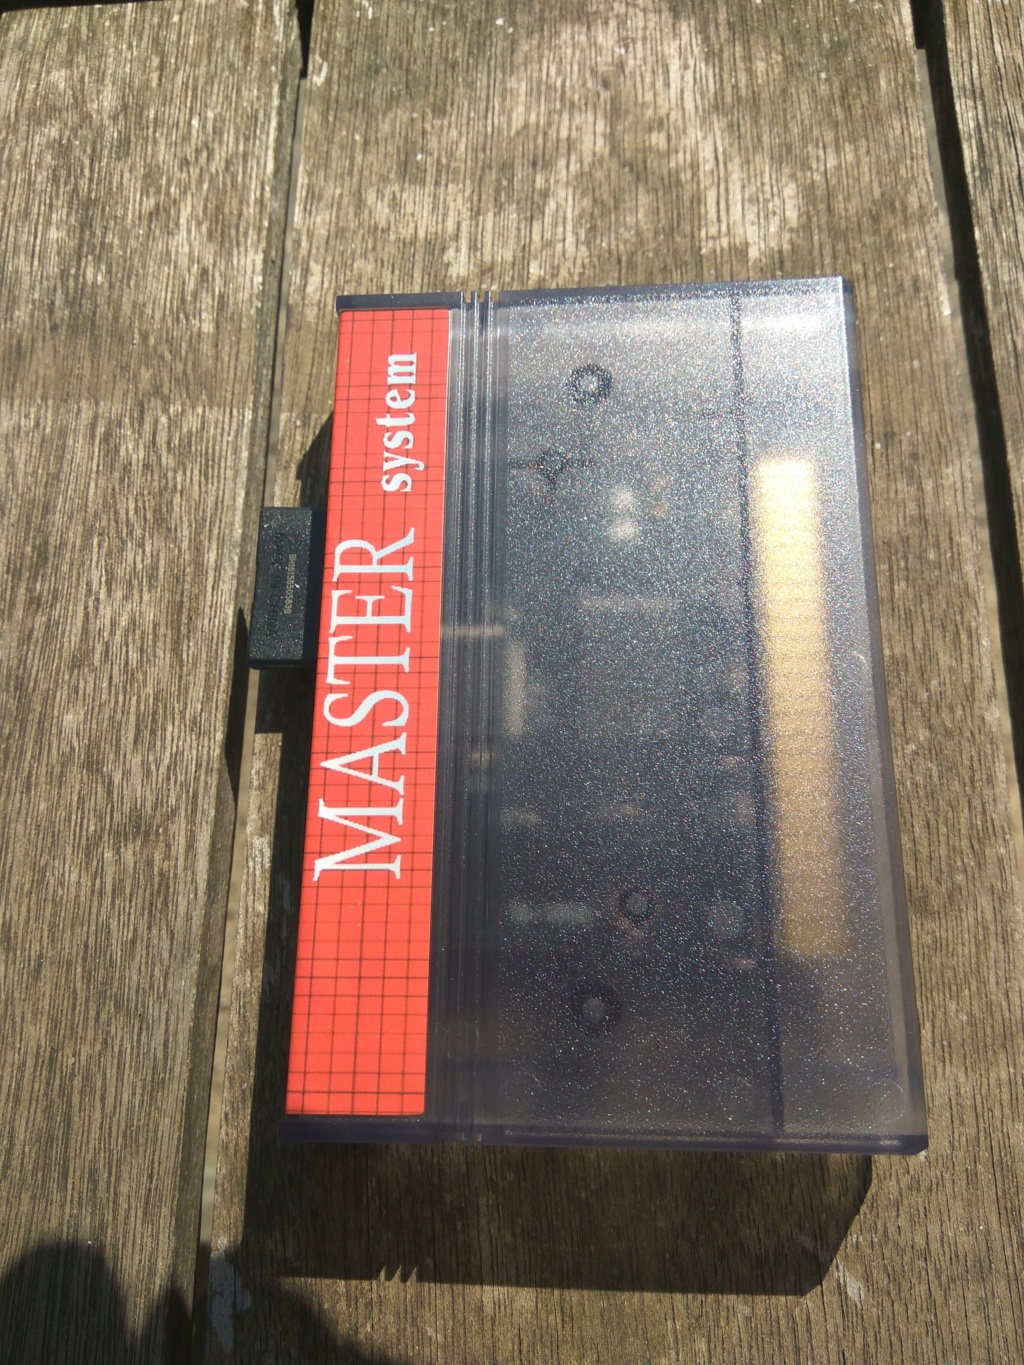 New Sega Master System Everdrive cheap from CHINA Img_2010